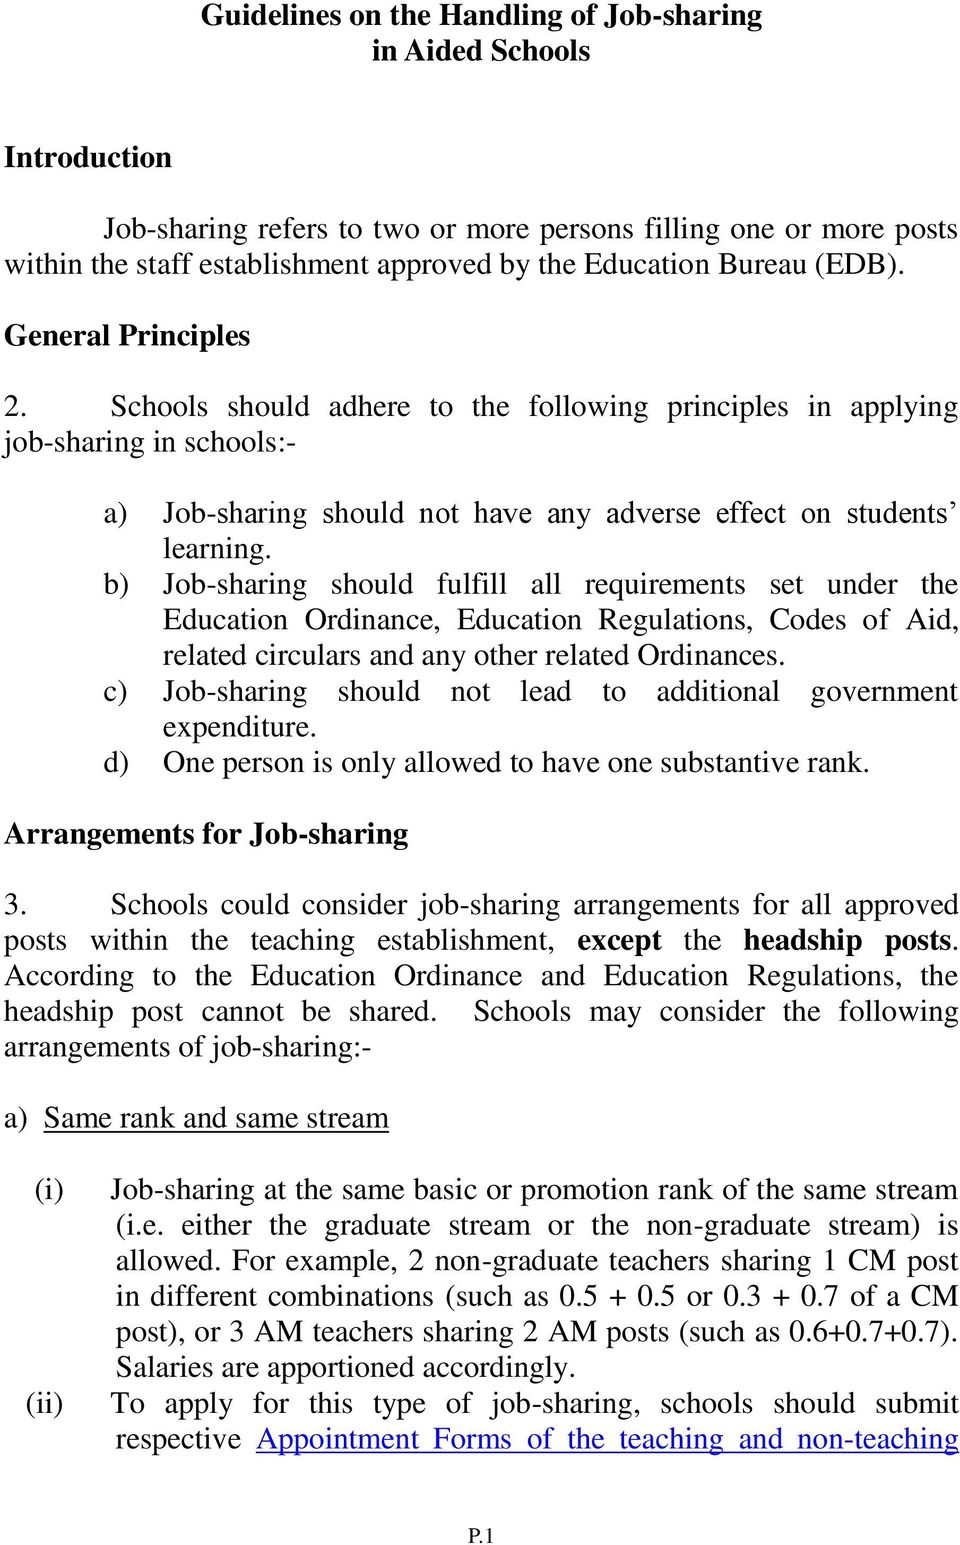 b) Job-sharing should fulfill all requirements set under the Education Ordinance, Education Regulations, Codes of Aid, related circulars and any other related Ordinances.